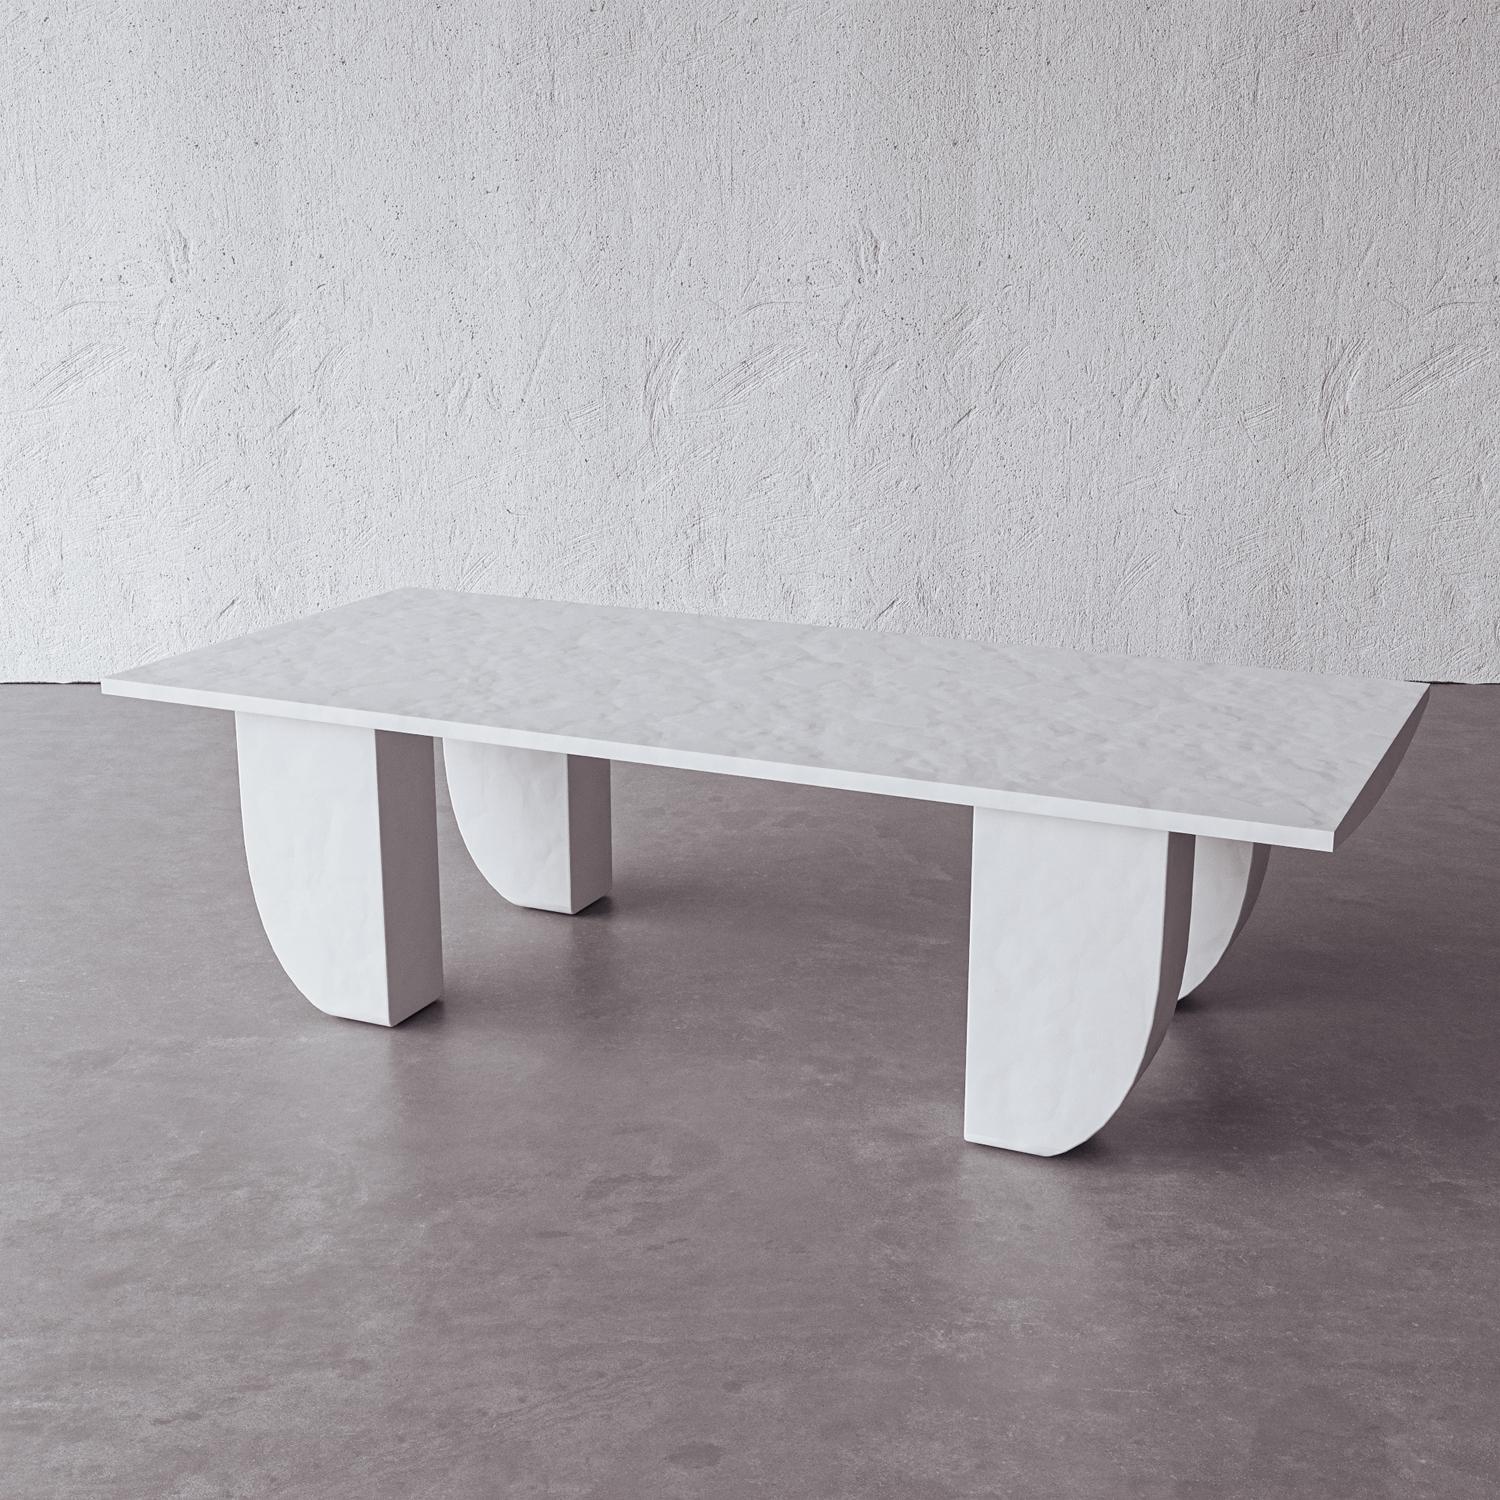 Sculpted in plaster, arced legs support a hand-cast rectangular top in this geometric, modern cocktail table. Handmade by artisans in Vietnam, the simple white surface complements a decorative interior and provides a blank space for collectible